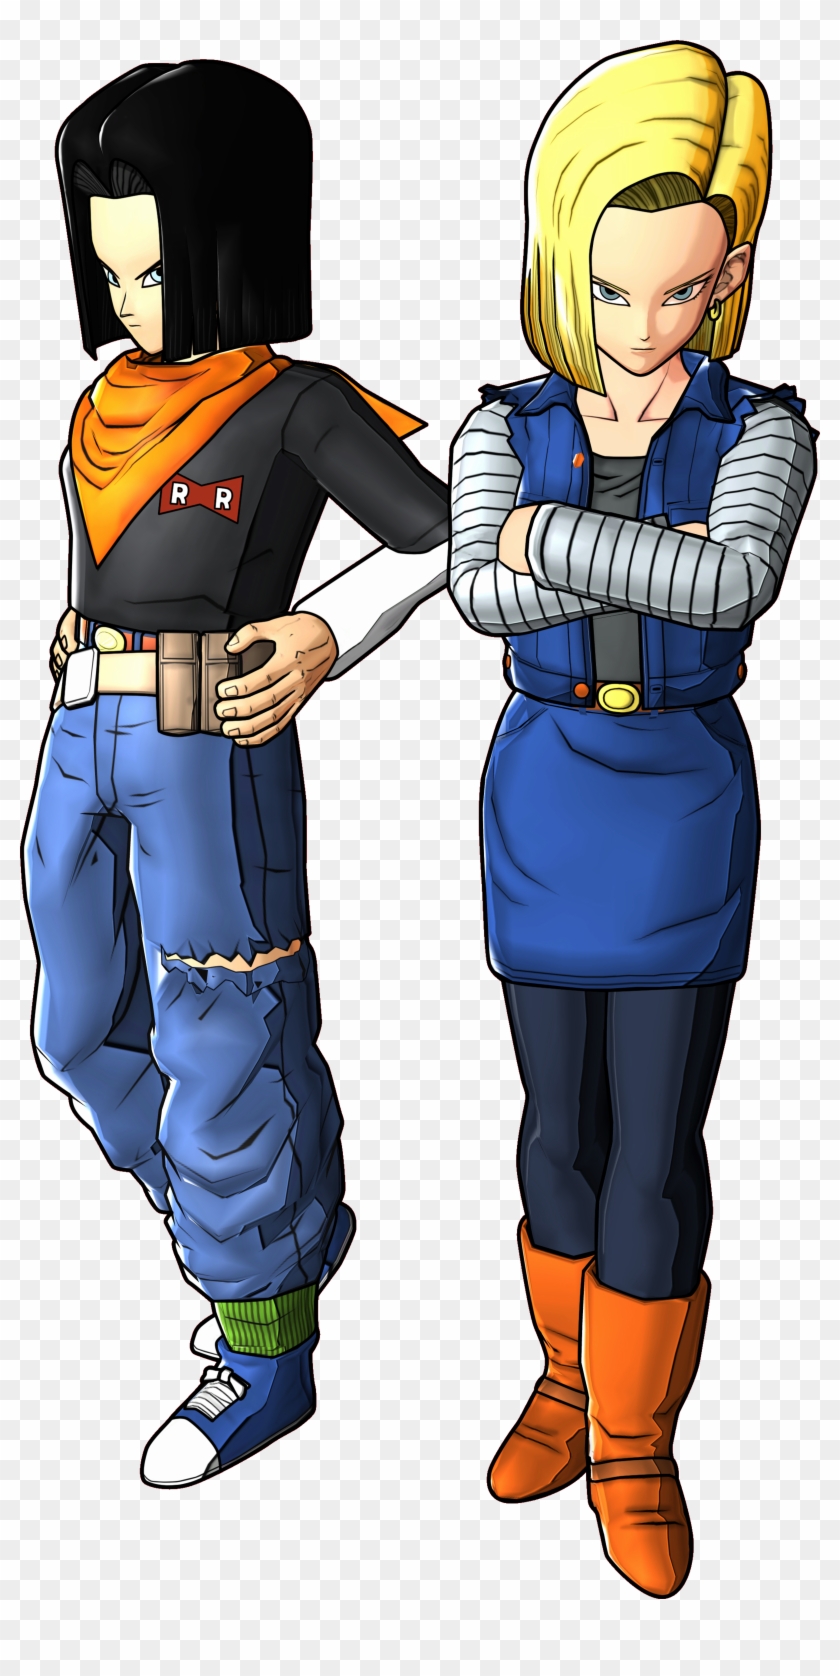 Android18 And 17 Battle Of Z Render - Android 18 E 17 Imagens Clipart